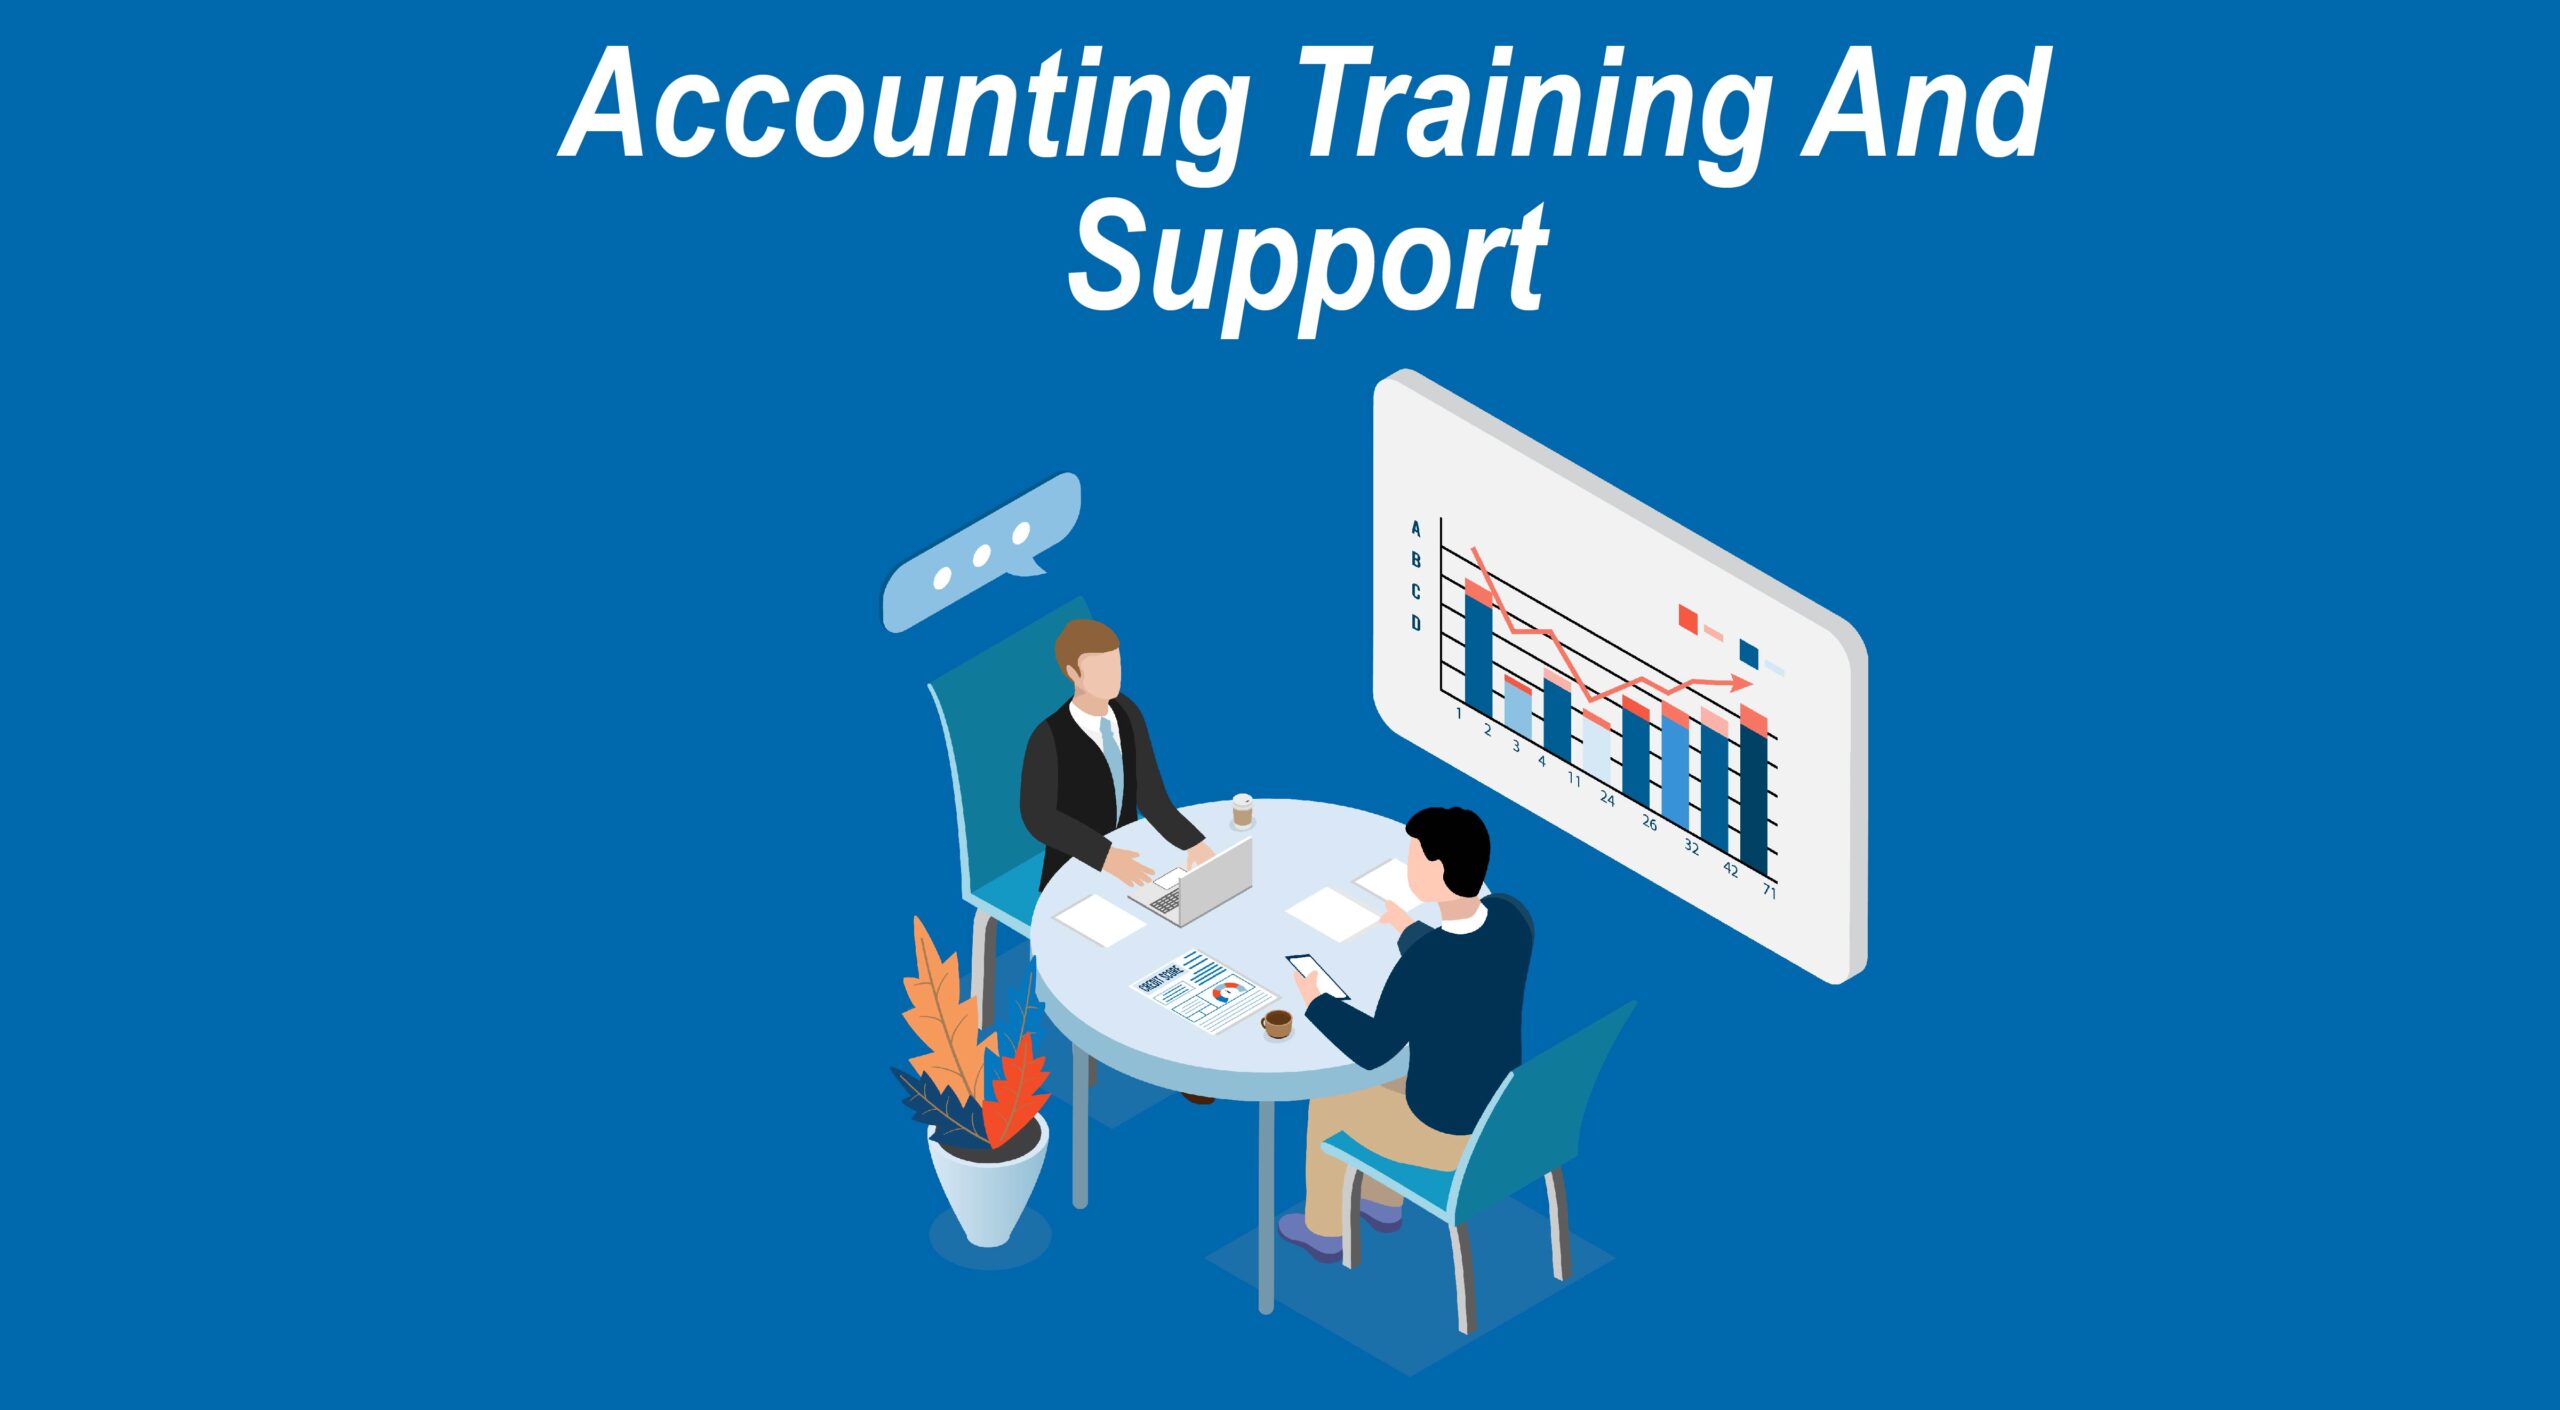 Accounting Training And Support